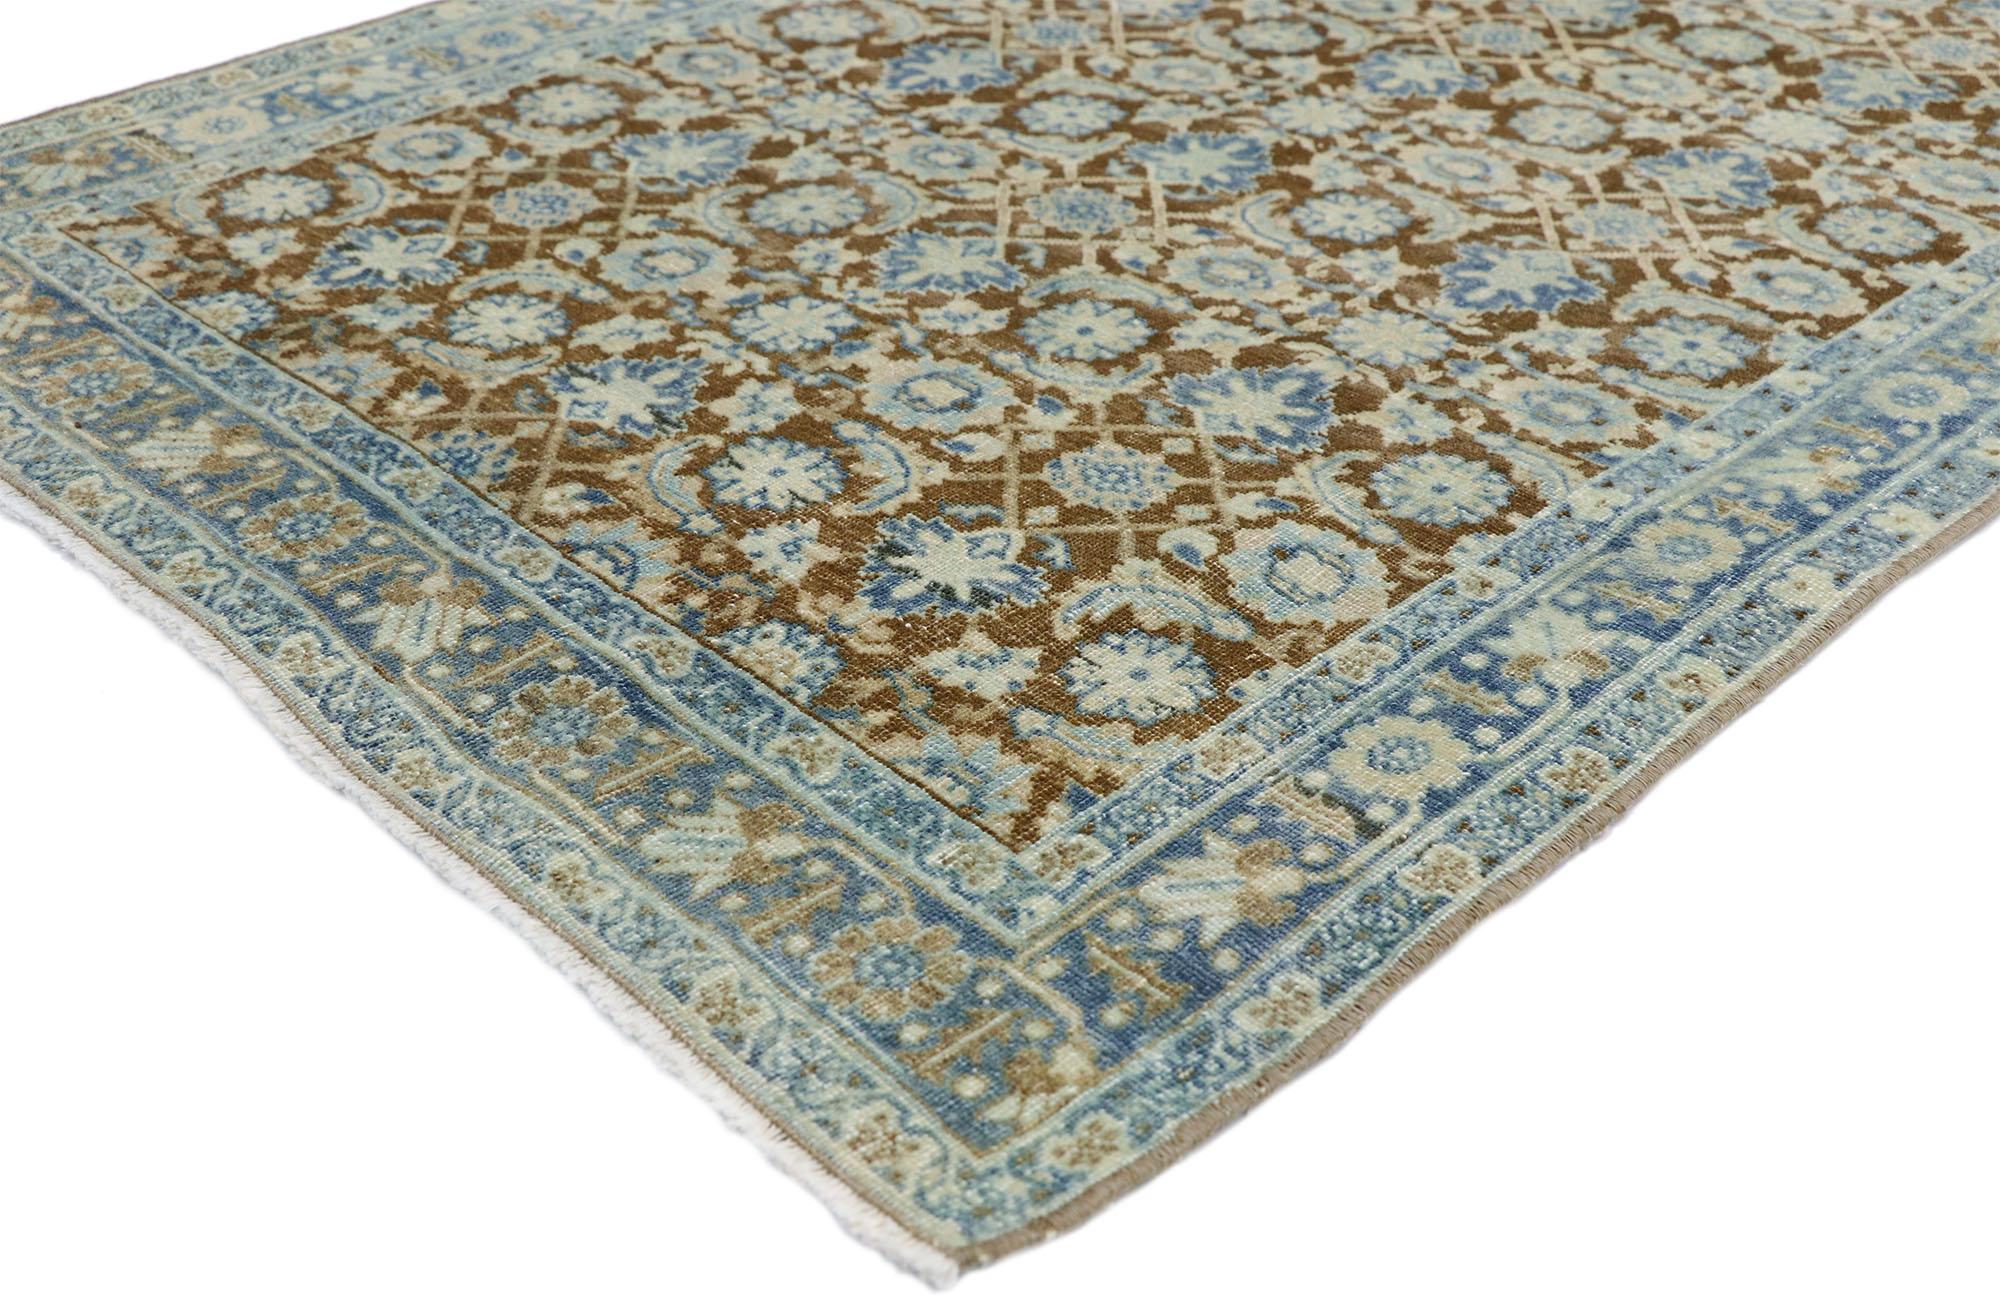 52564, distressed antique Persian Tabriz style runner with Gustavian style. With its ornate floral detailing and weathered beauty combined with Gustavian grace, this hand knotted wool distressed antique Persian Tabriz Design runner displays